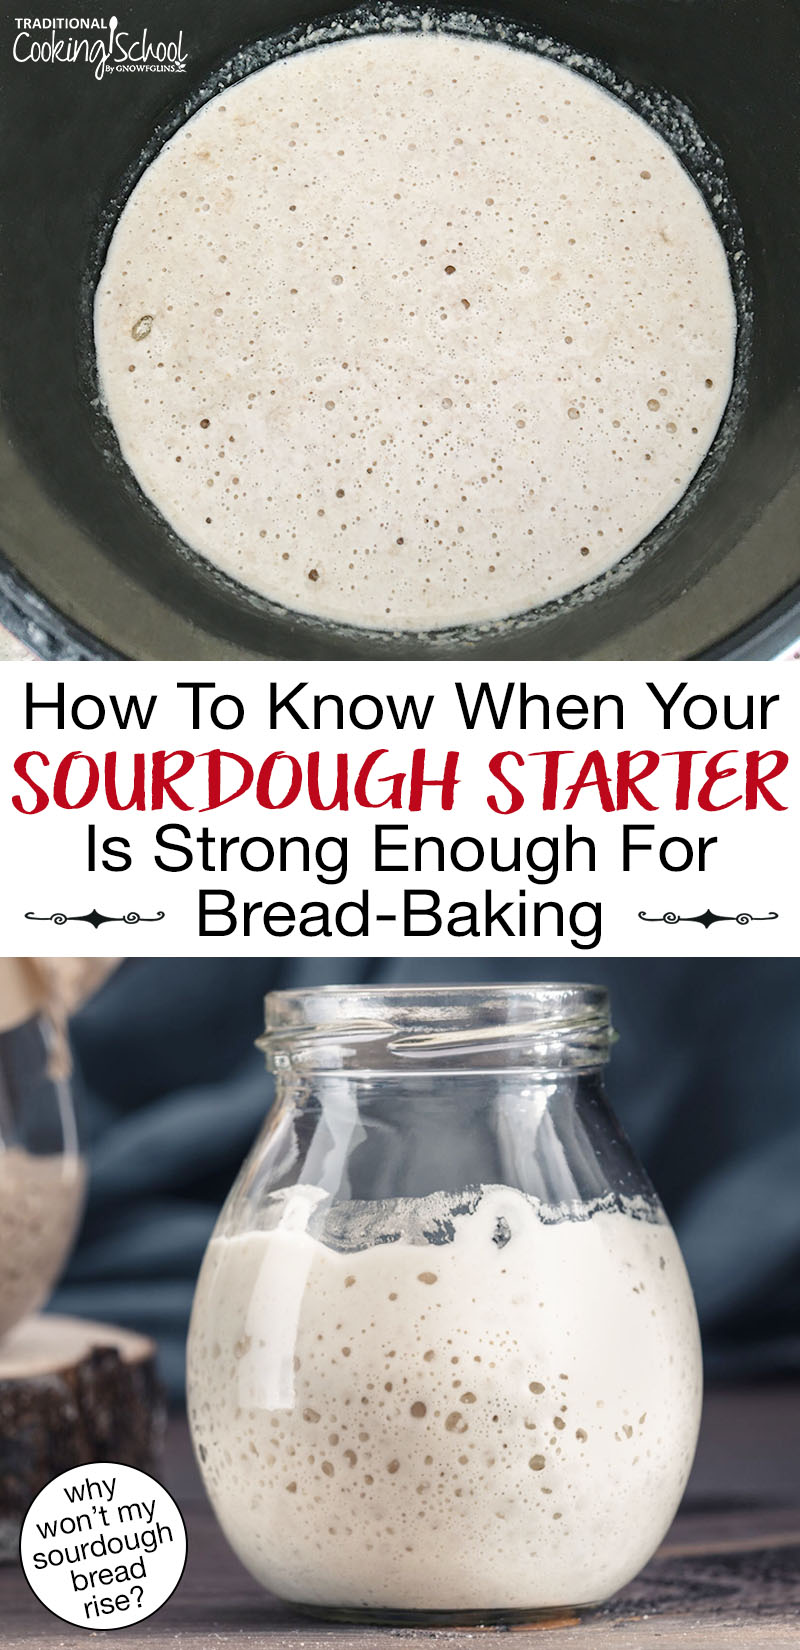 Photo collage of bubbly sourdough starter. Text overlay says: "How To Know When Your Sourdough Starter Is Strong Enough For Bread-Baking (why won't my sourdough bread rise?)"